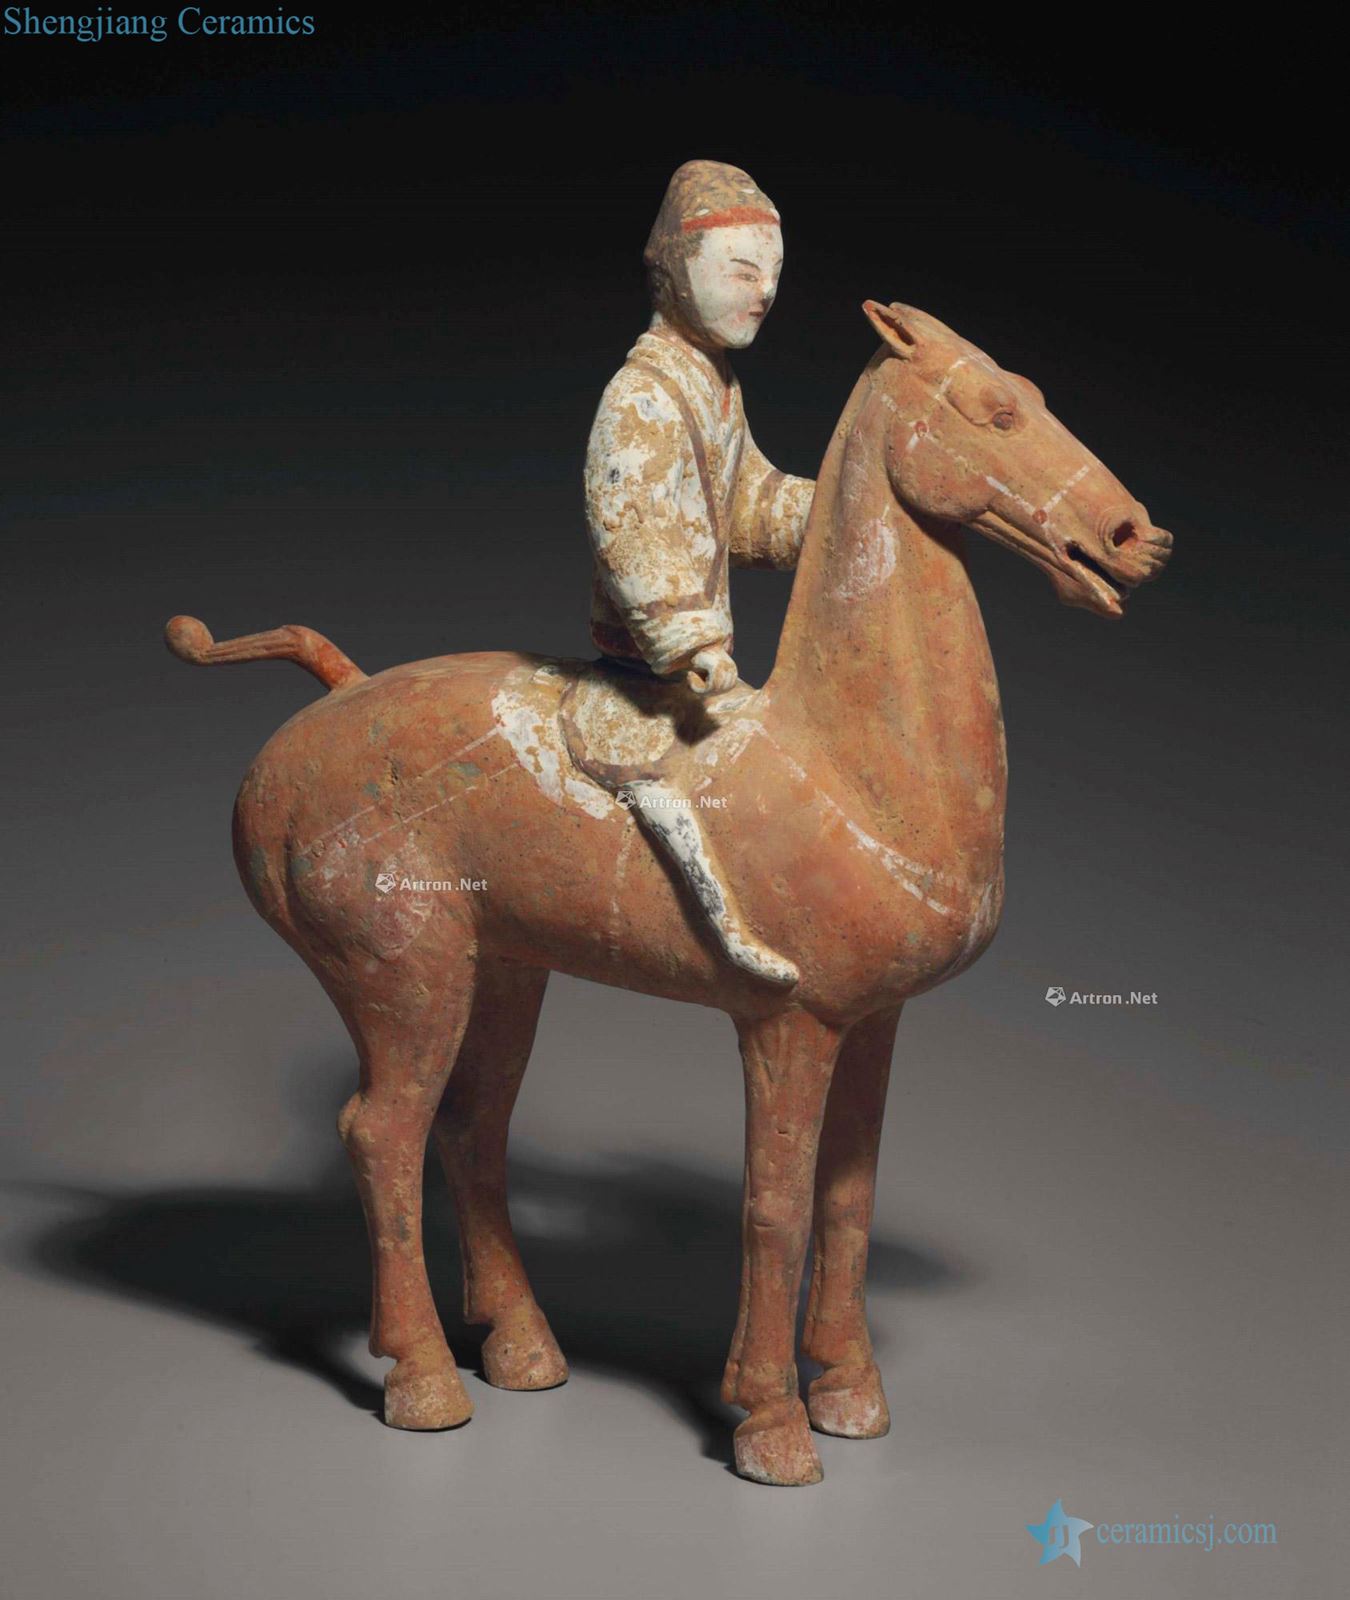 WESTERN HAN DYNASTY (206 BC - AD8) made A GREY POTTERY FIGURE OF the AN EQUESTRIAN